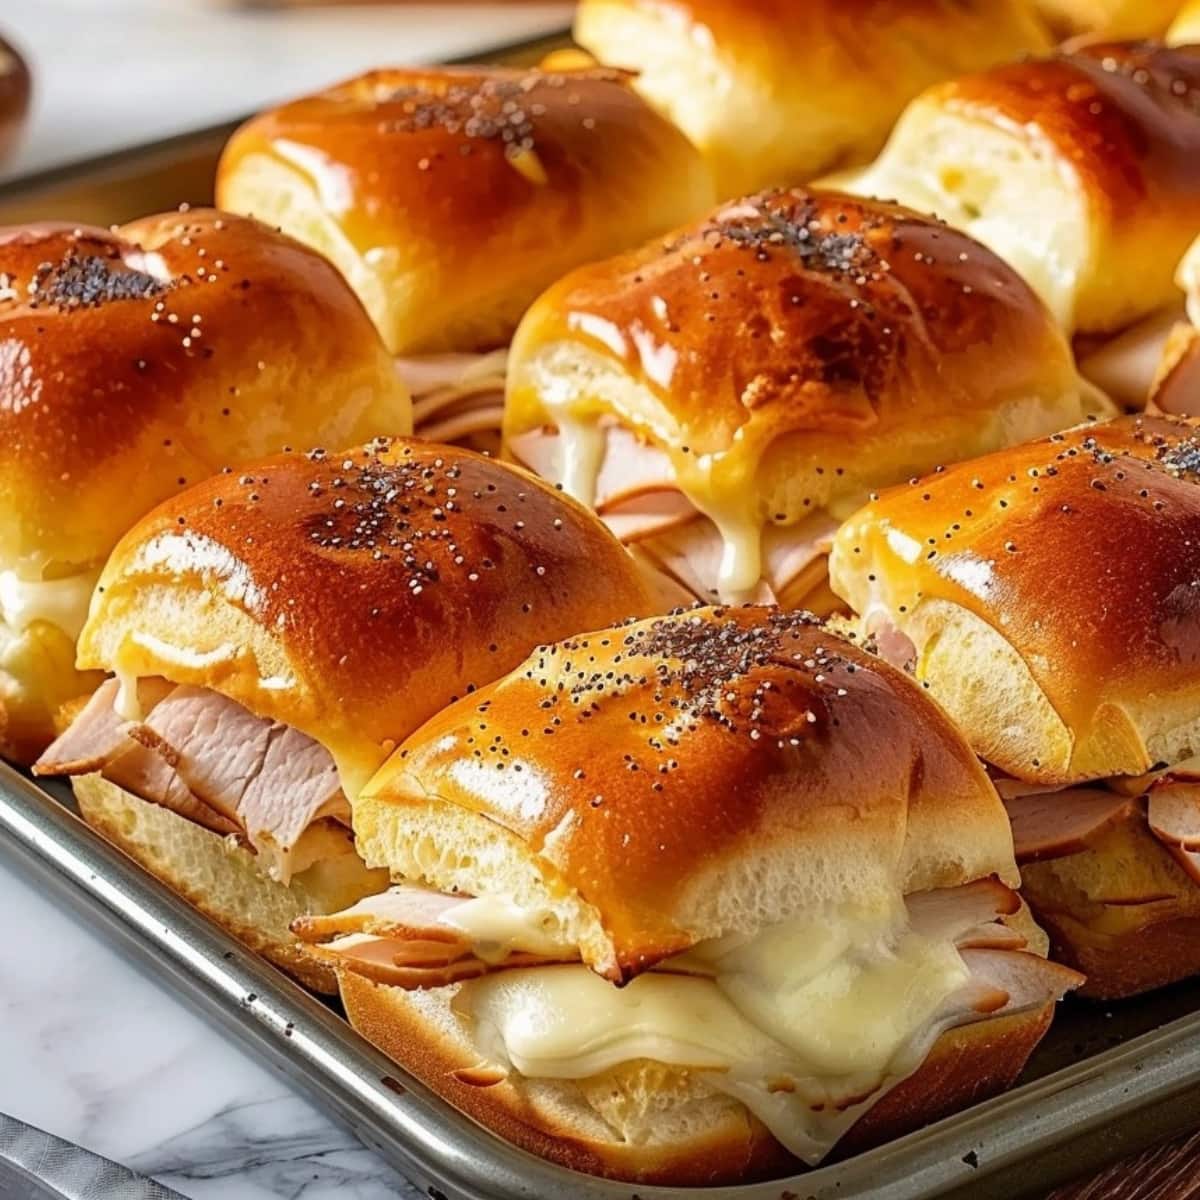 Turkey and cheese sliders arranged on a sheet pan.